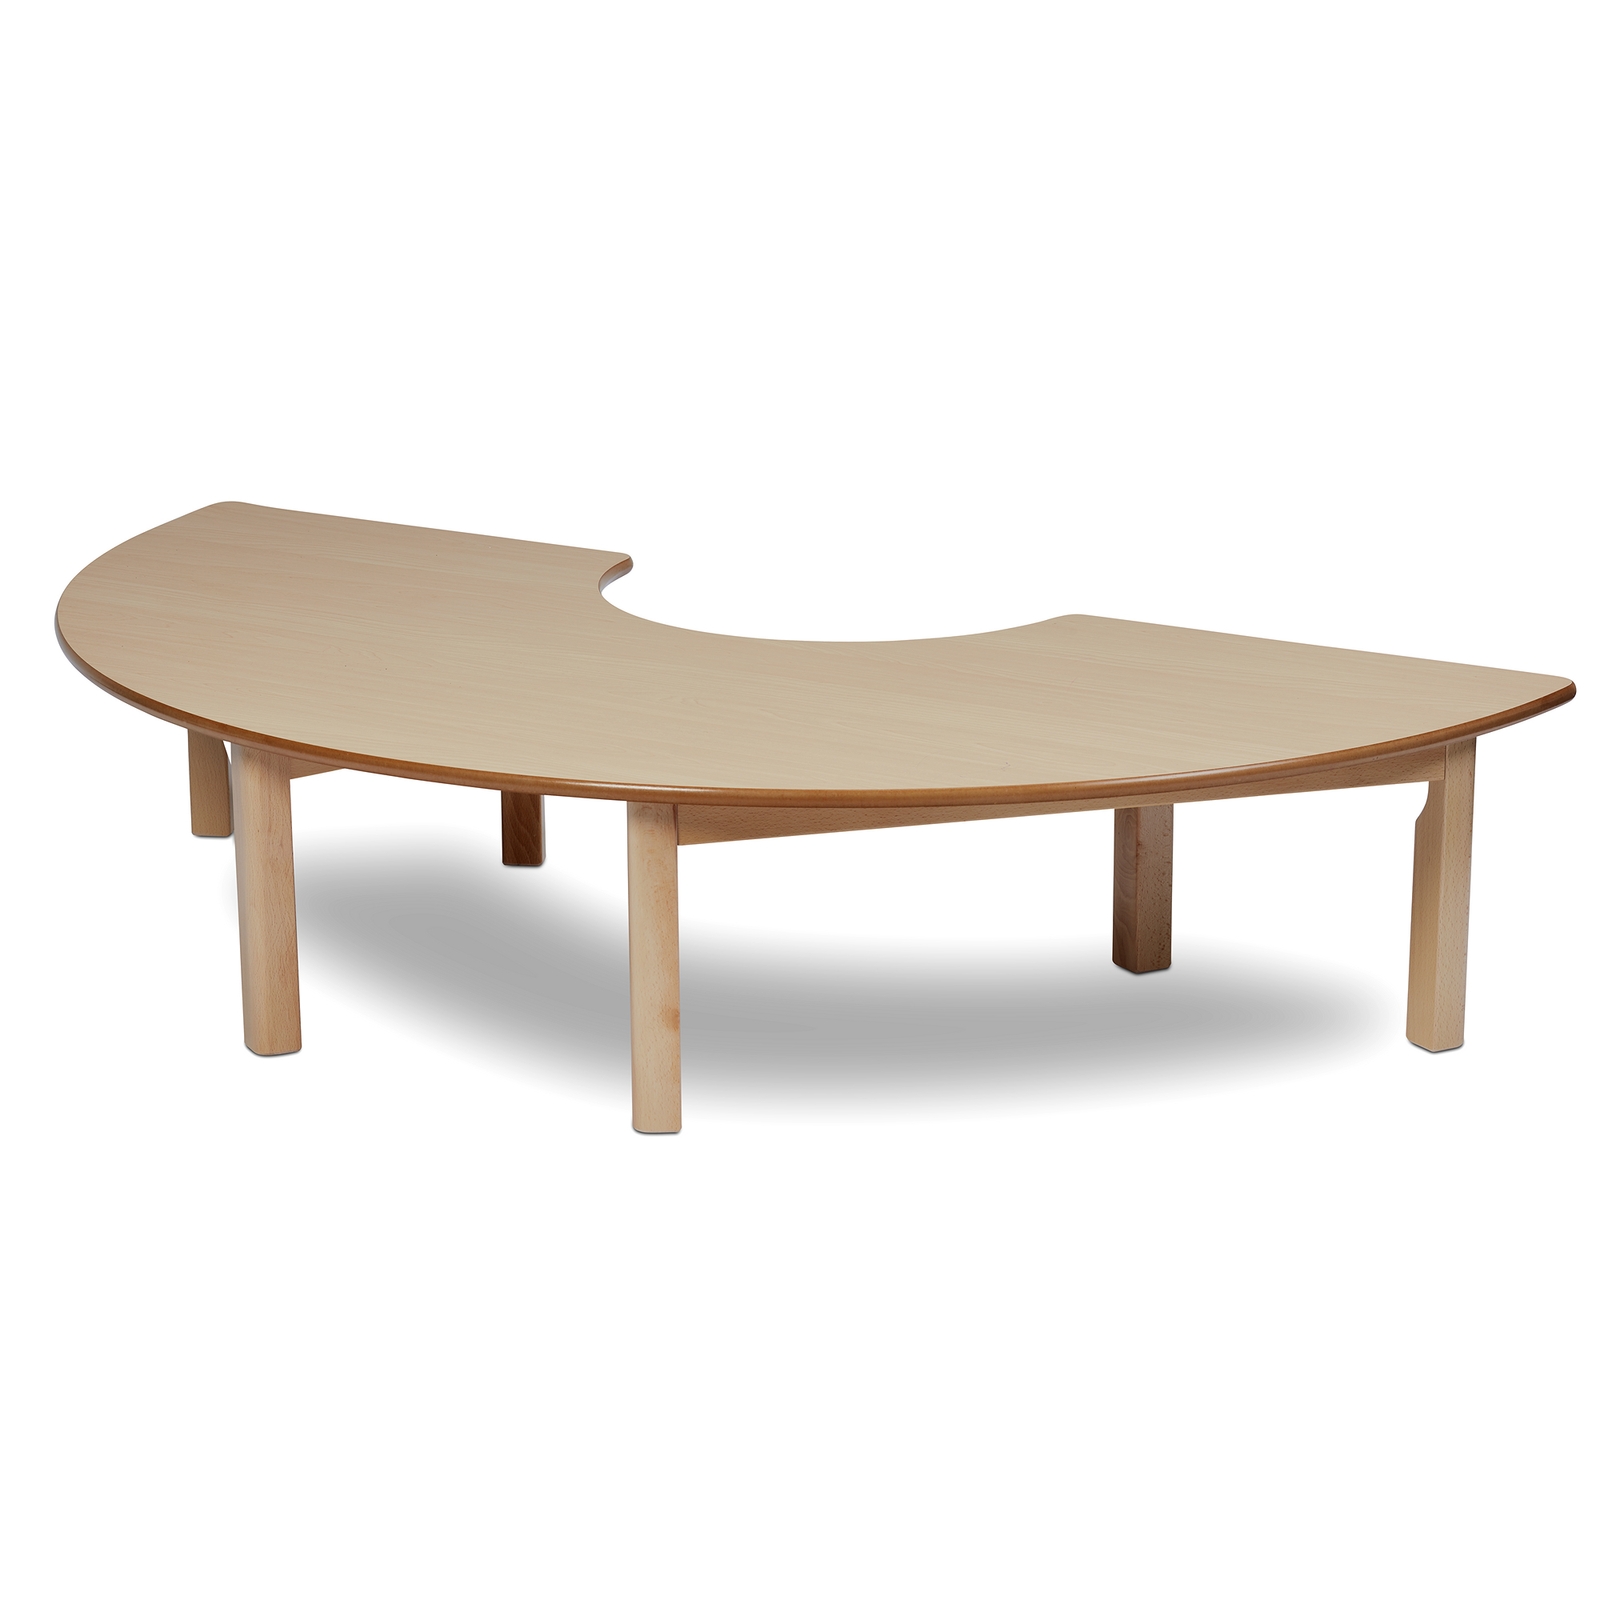 Playscapes Semi Circle Table - 320mm Height